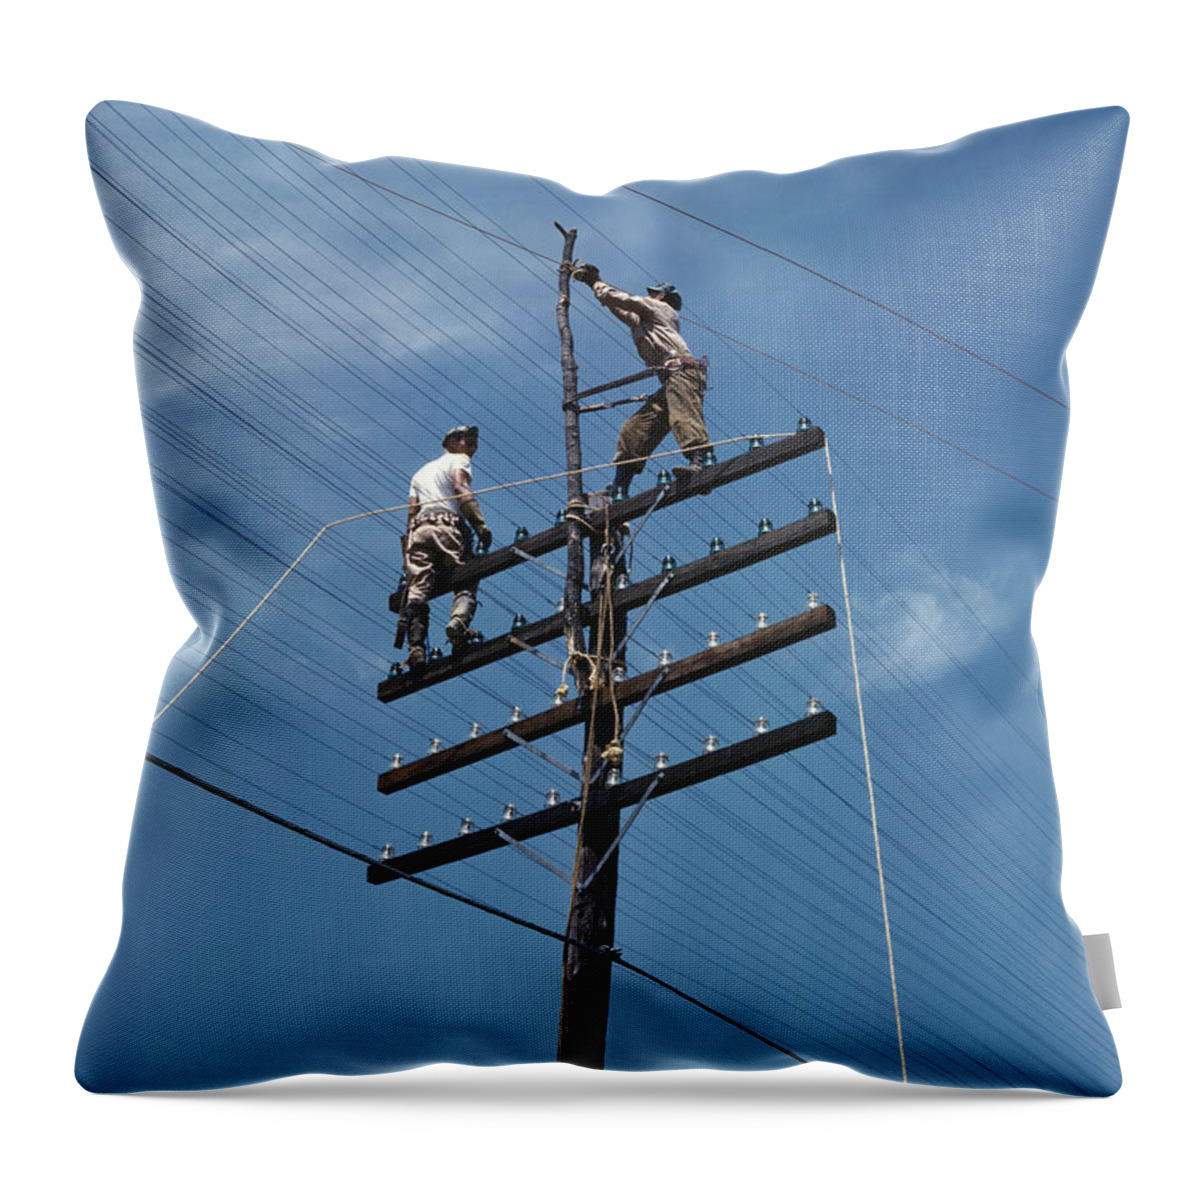 Richard Reeve Throw Pillow featuring the photograph Working The Line by Richard Reeve